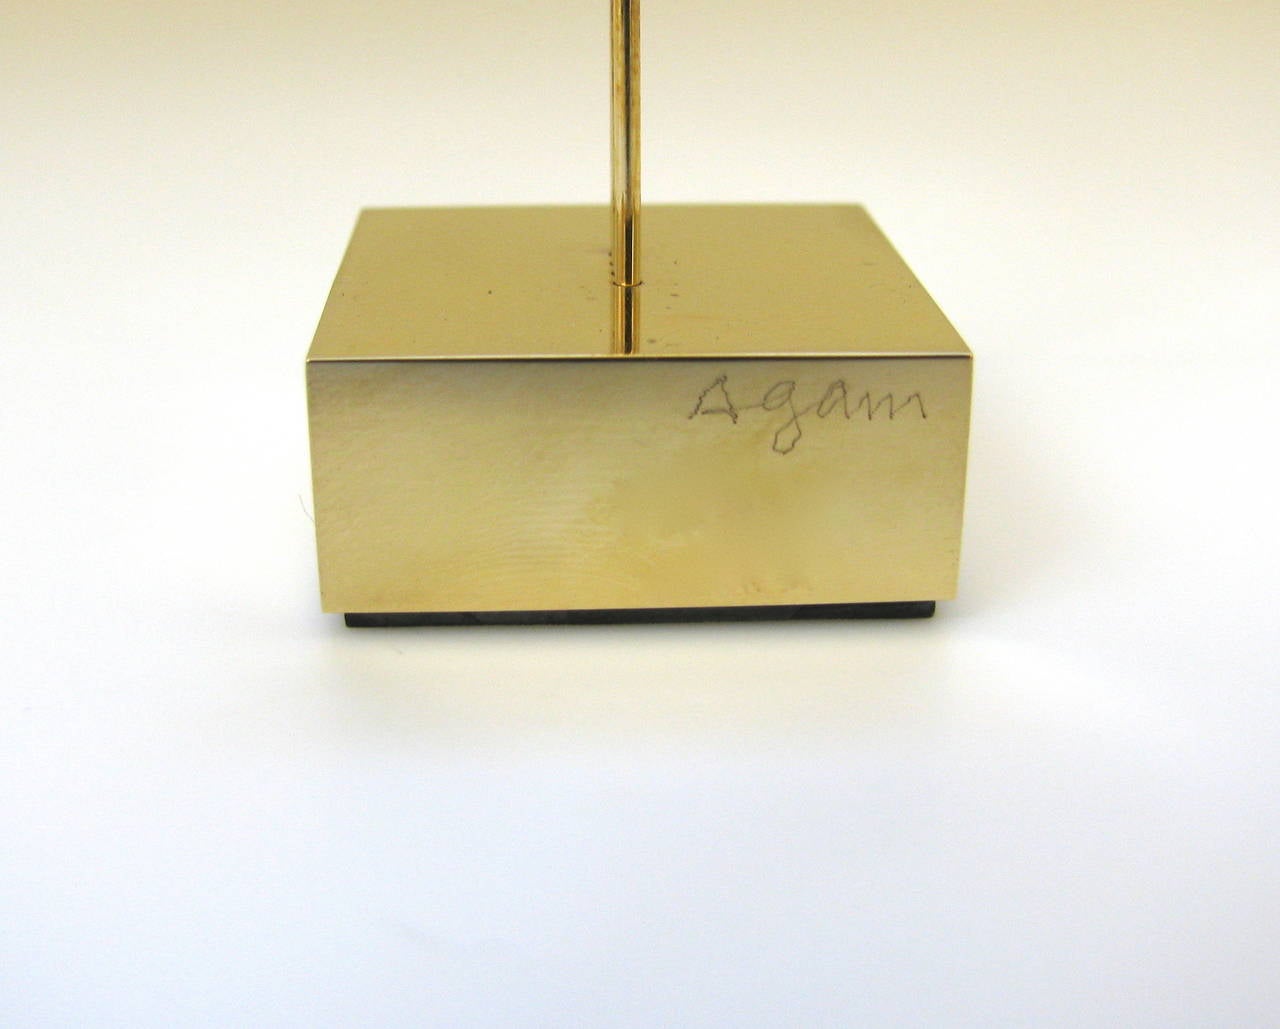 Modernist Gold Sculpture by Artist Yaakov Agam Edition 1/3 For Sale 3